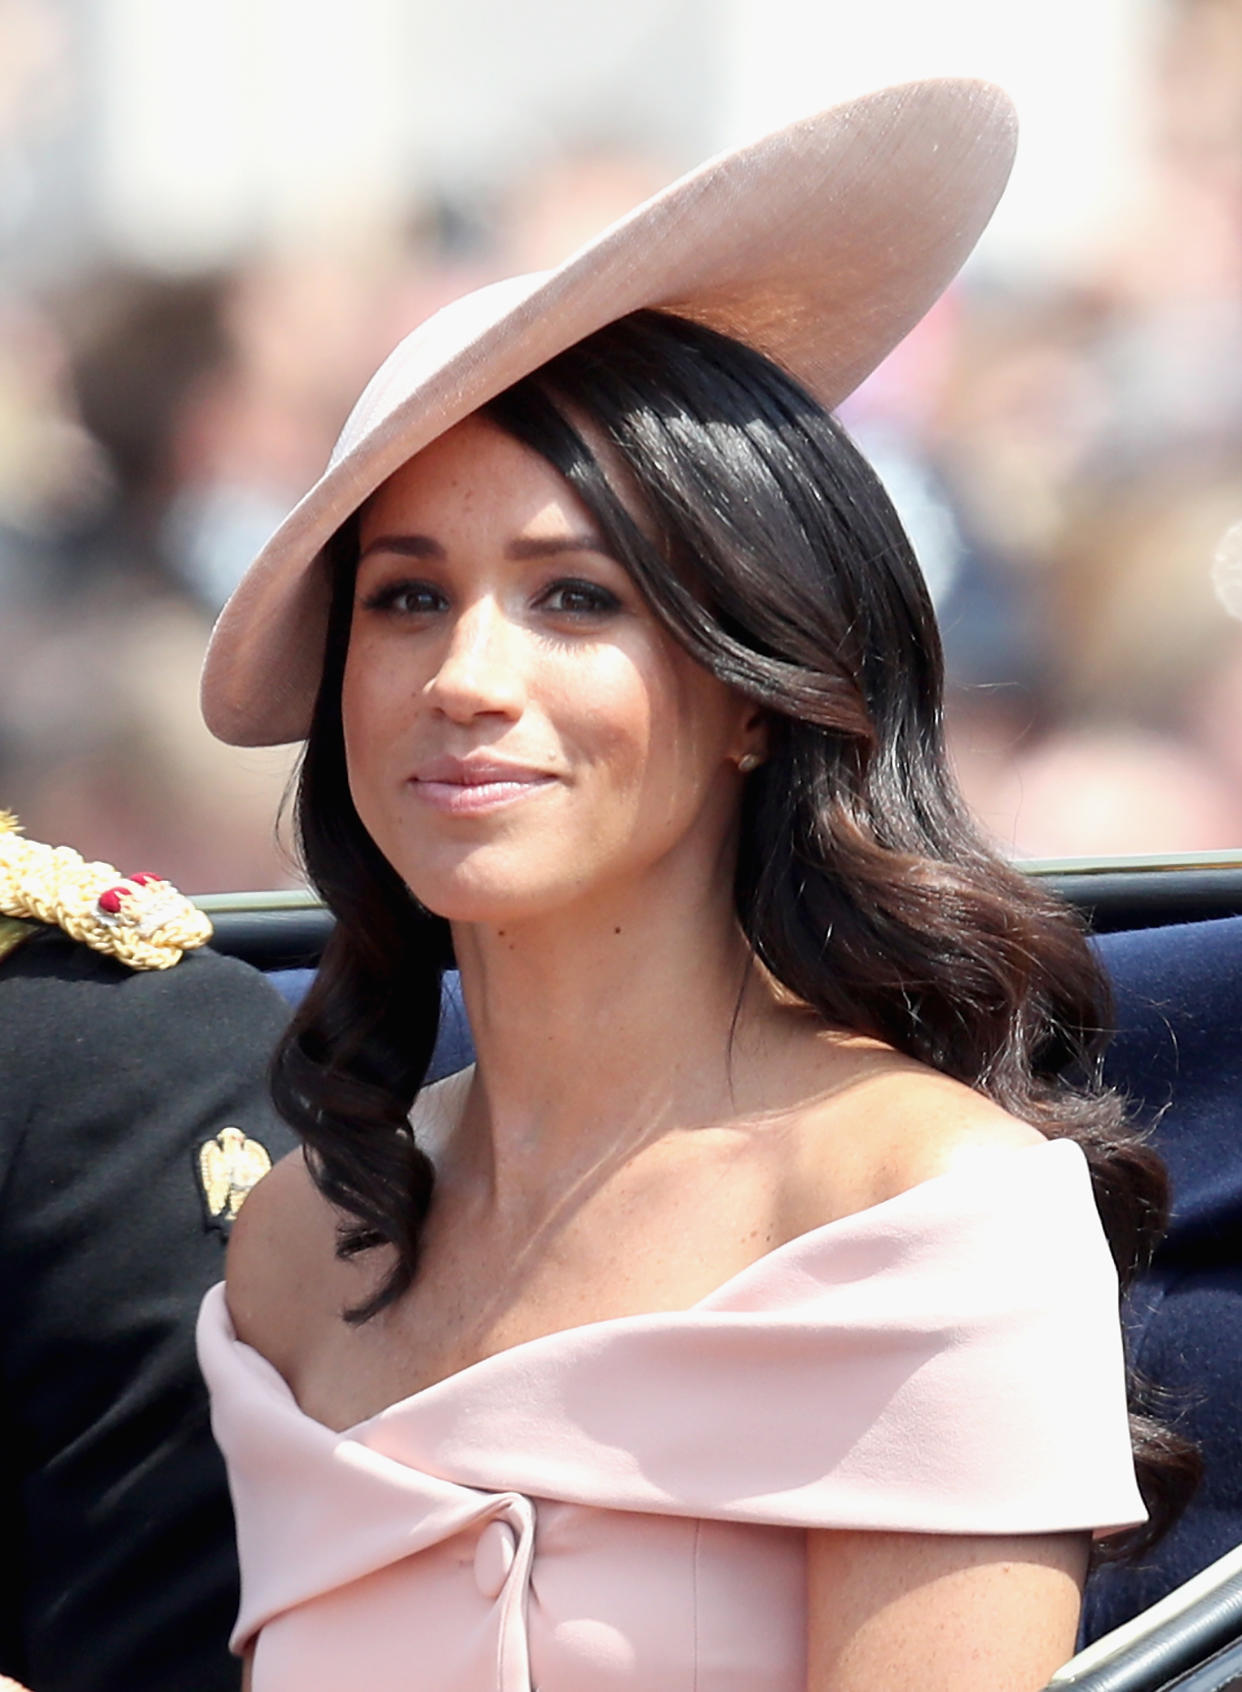 Meghan Markle is being shamed for showing her shoulders. Here’s why that’s unfair. (Photo: Getty Images)